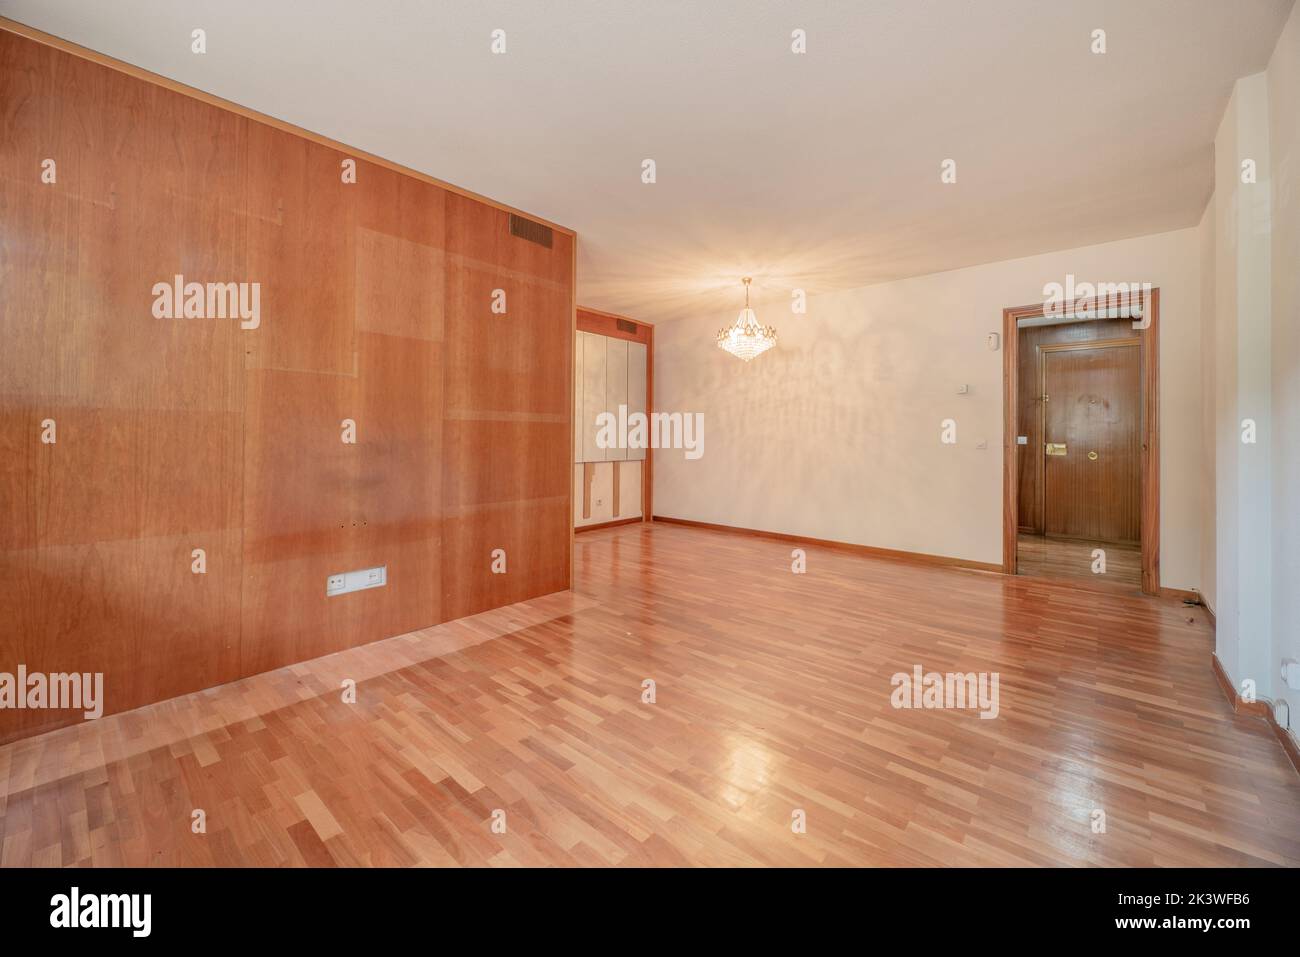 Empty room with a wall covered with a wooden varnish mural in a color that matches the parquet floors Stock Photo